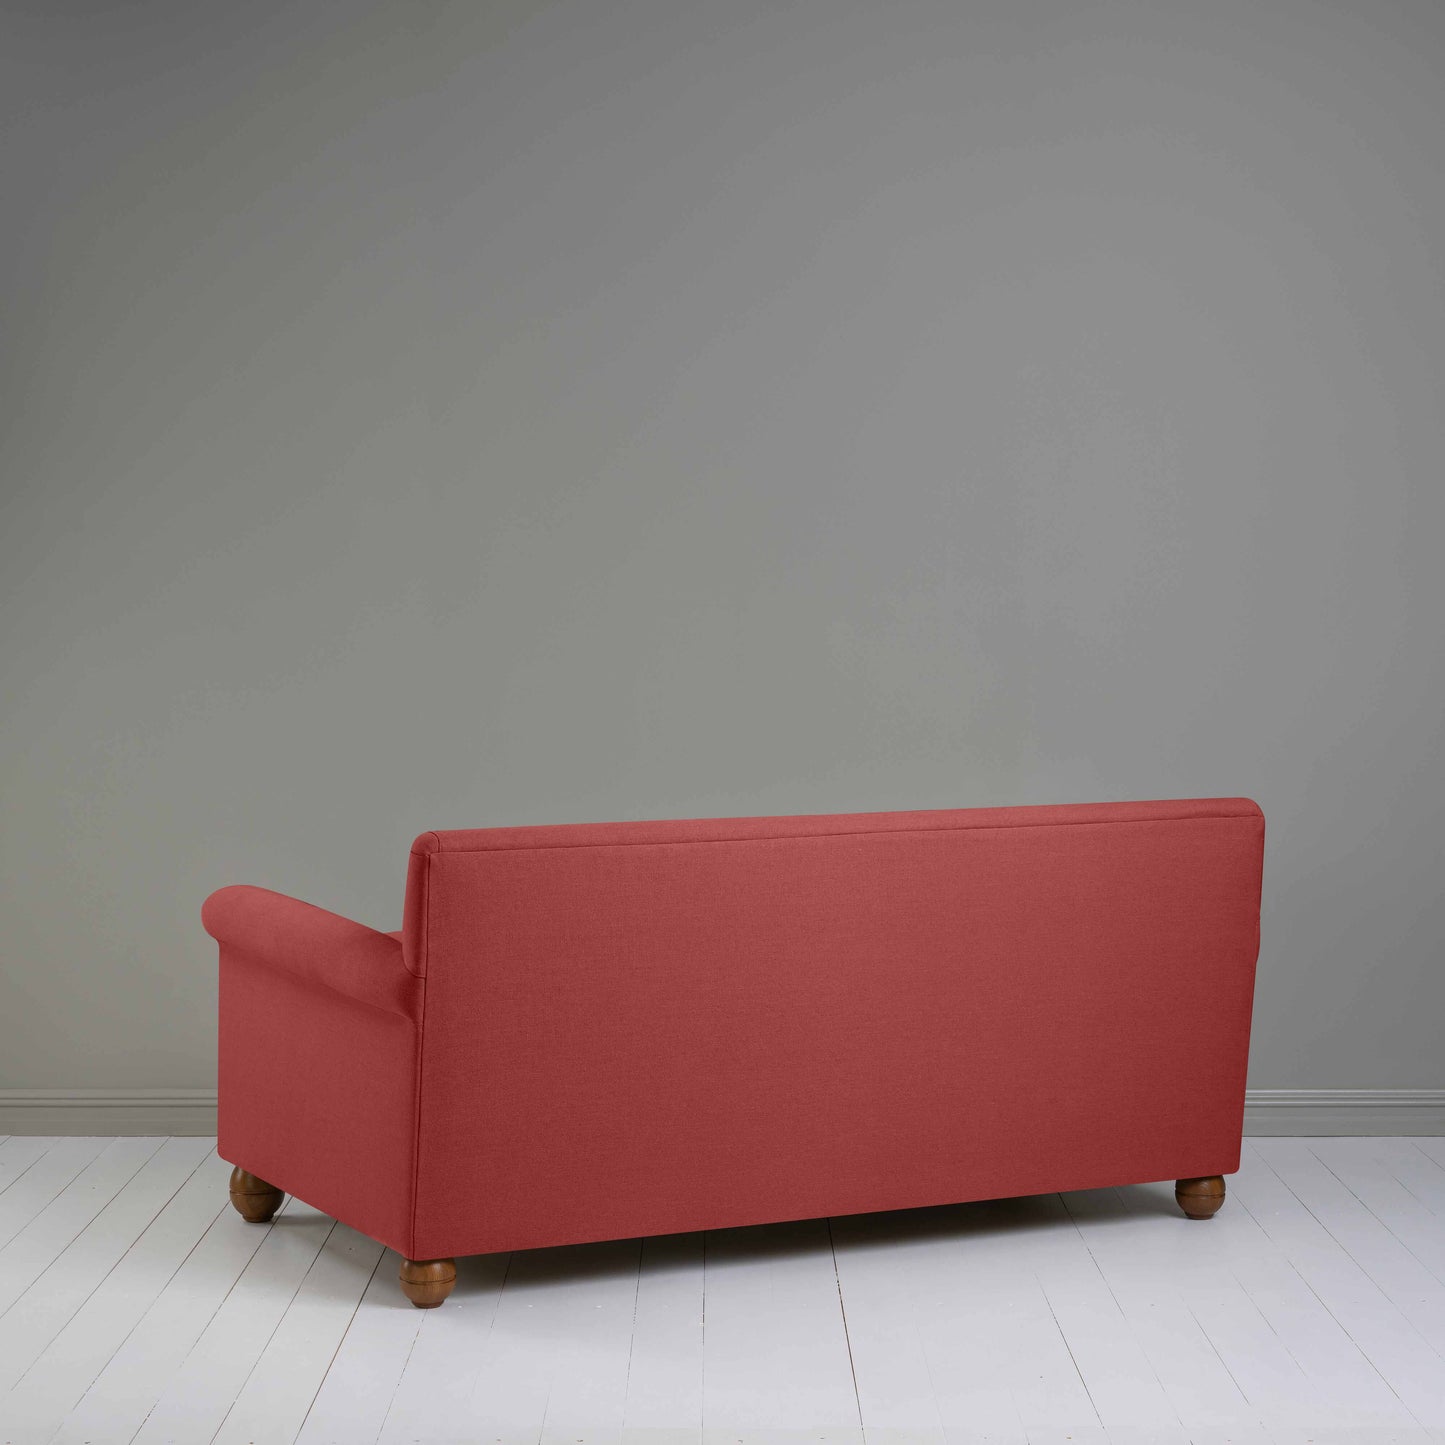 Idler 3 Seater Sofa in Laidback Linen Rouge